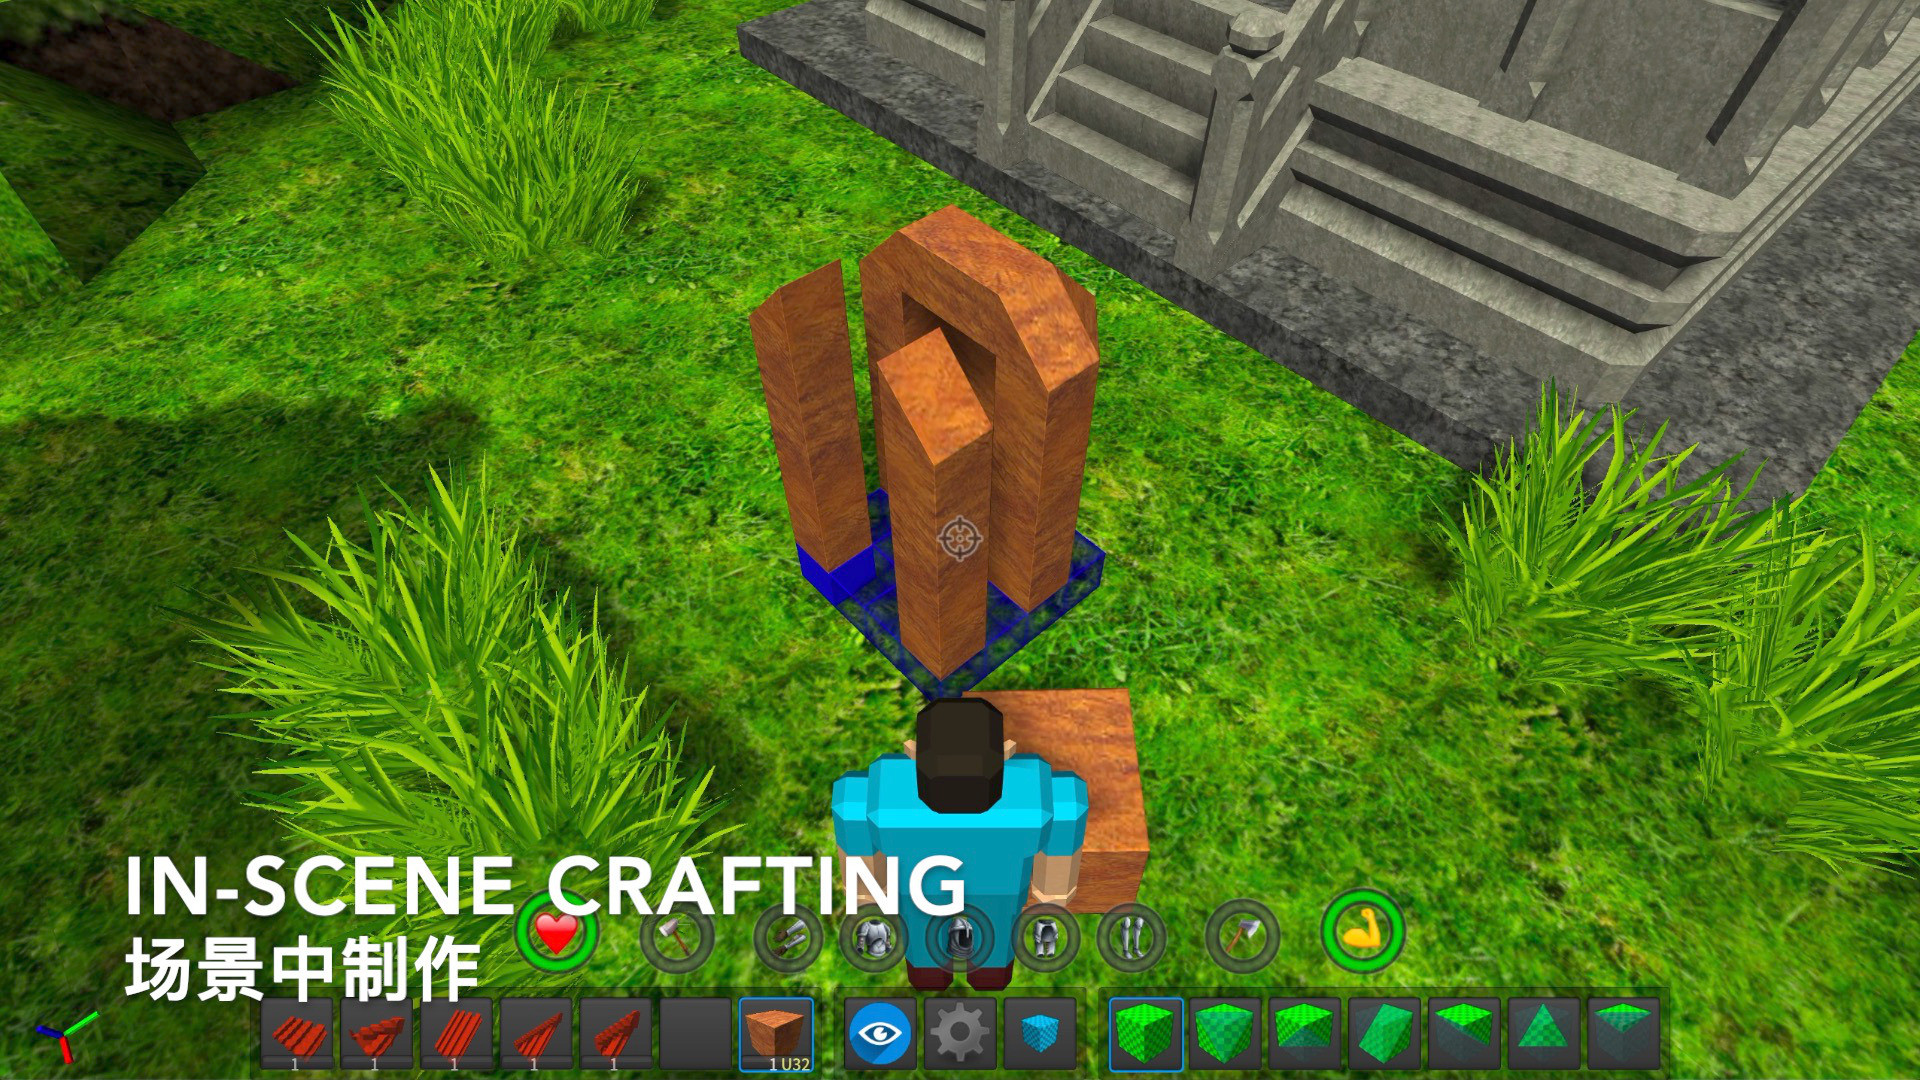 Craftica Free Download